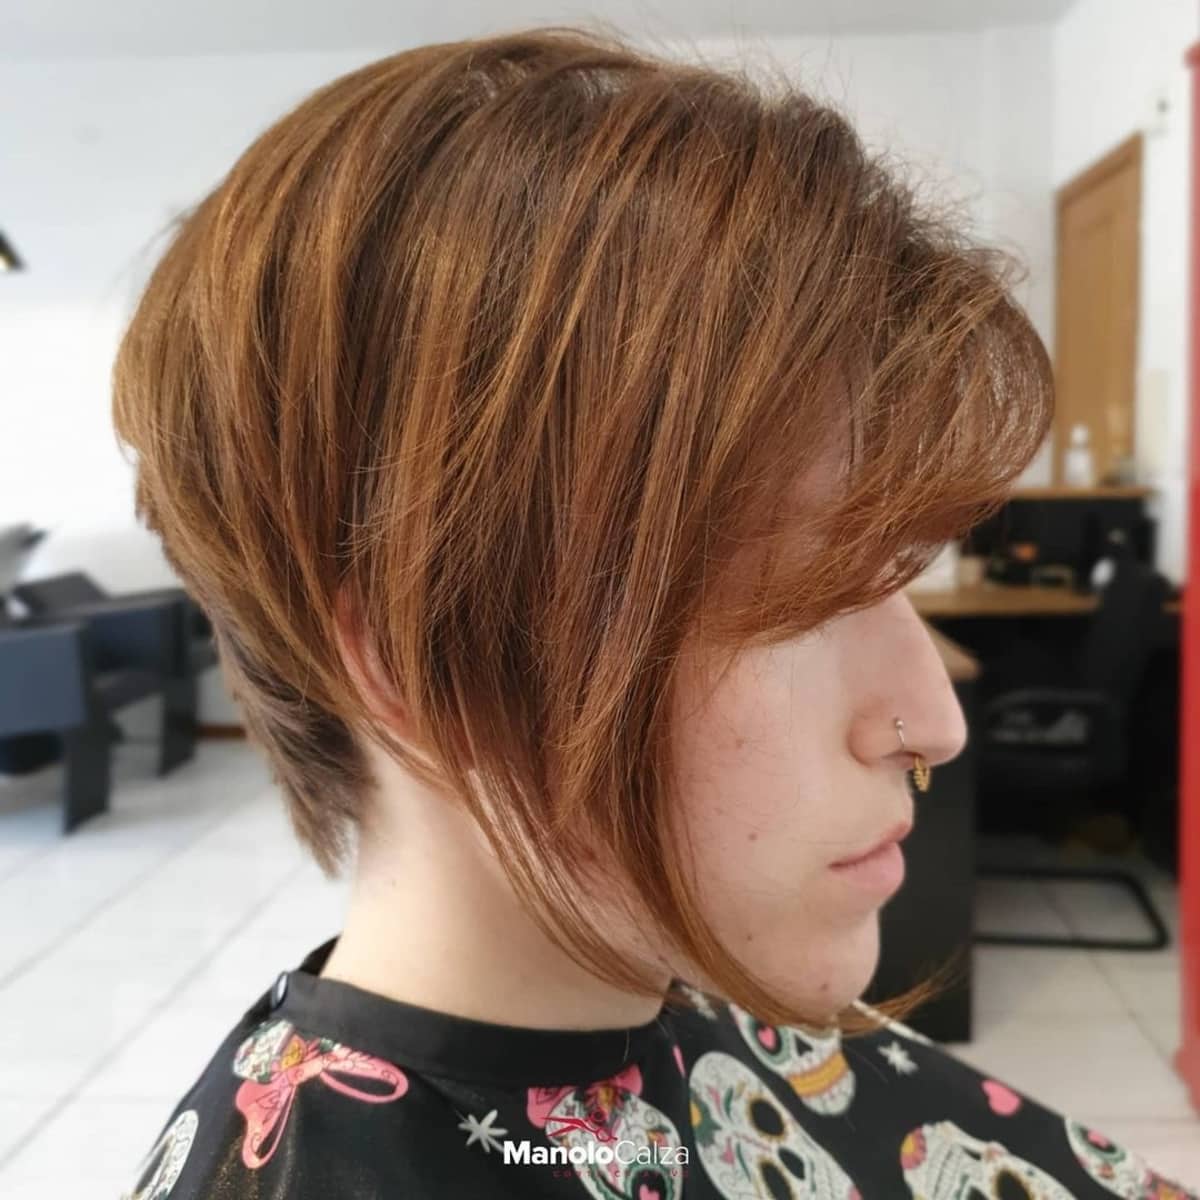 Thick pixie bob with medium to long layers and side bangs